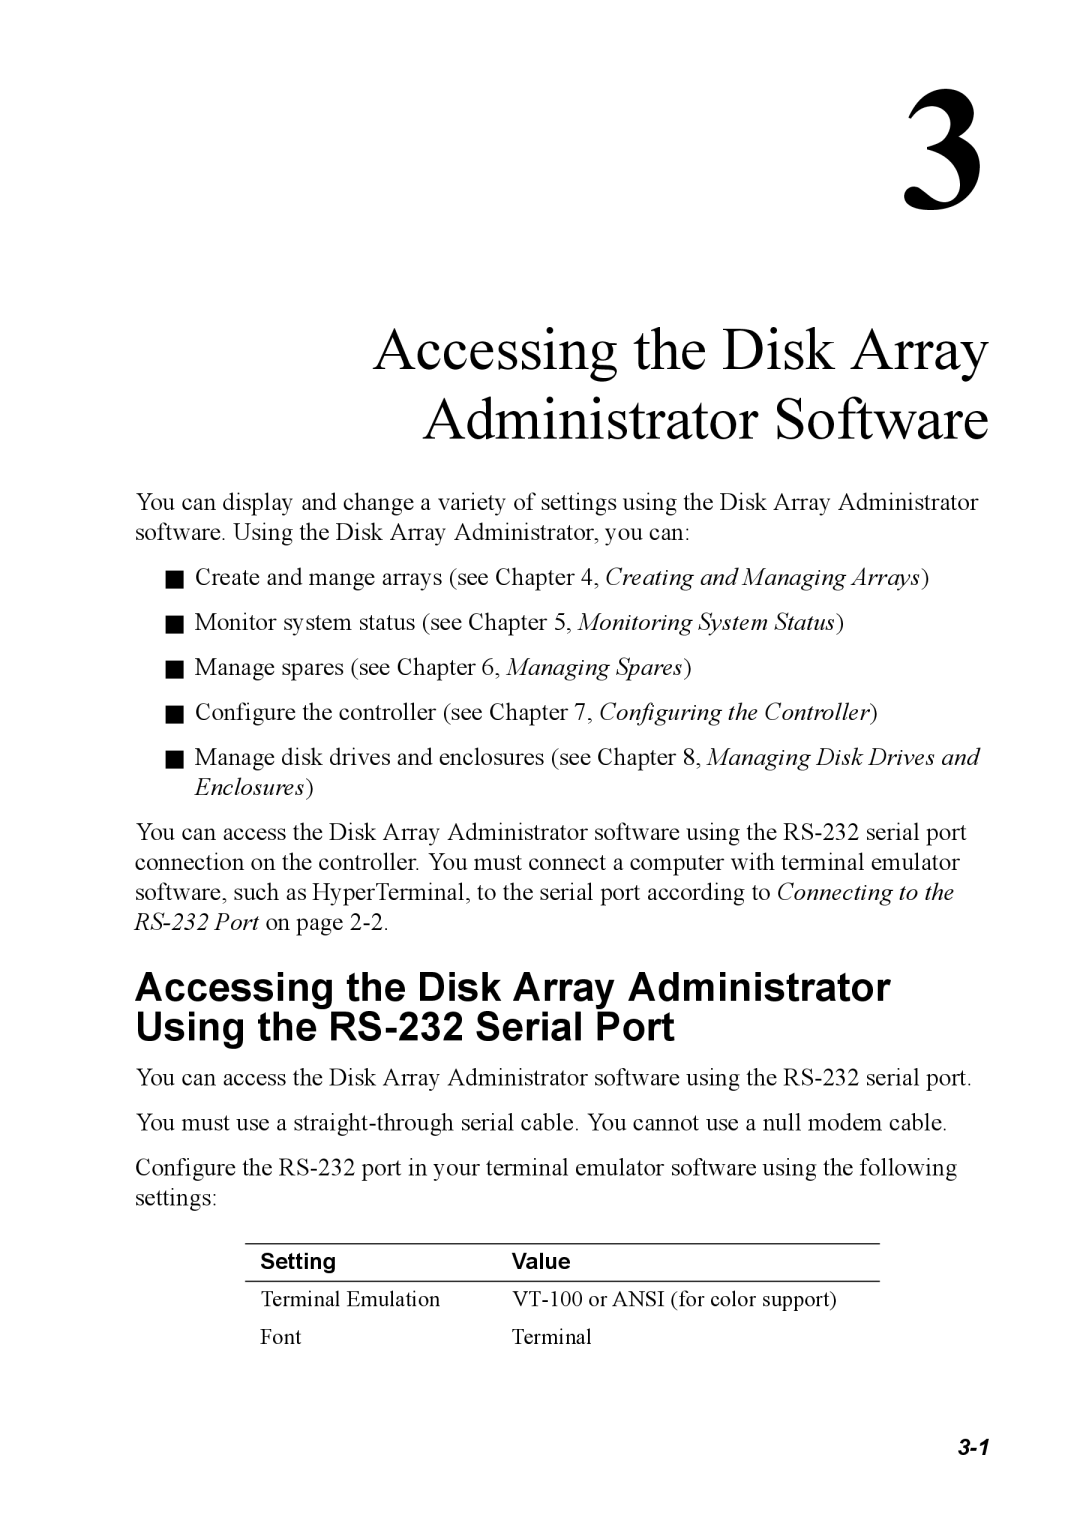 Chaparral G5312/G7313, K5312/K7313 manual Accessing the Disk Array Administrator Software, Setting Value 